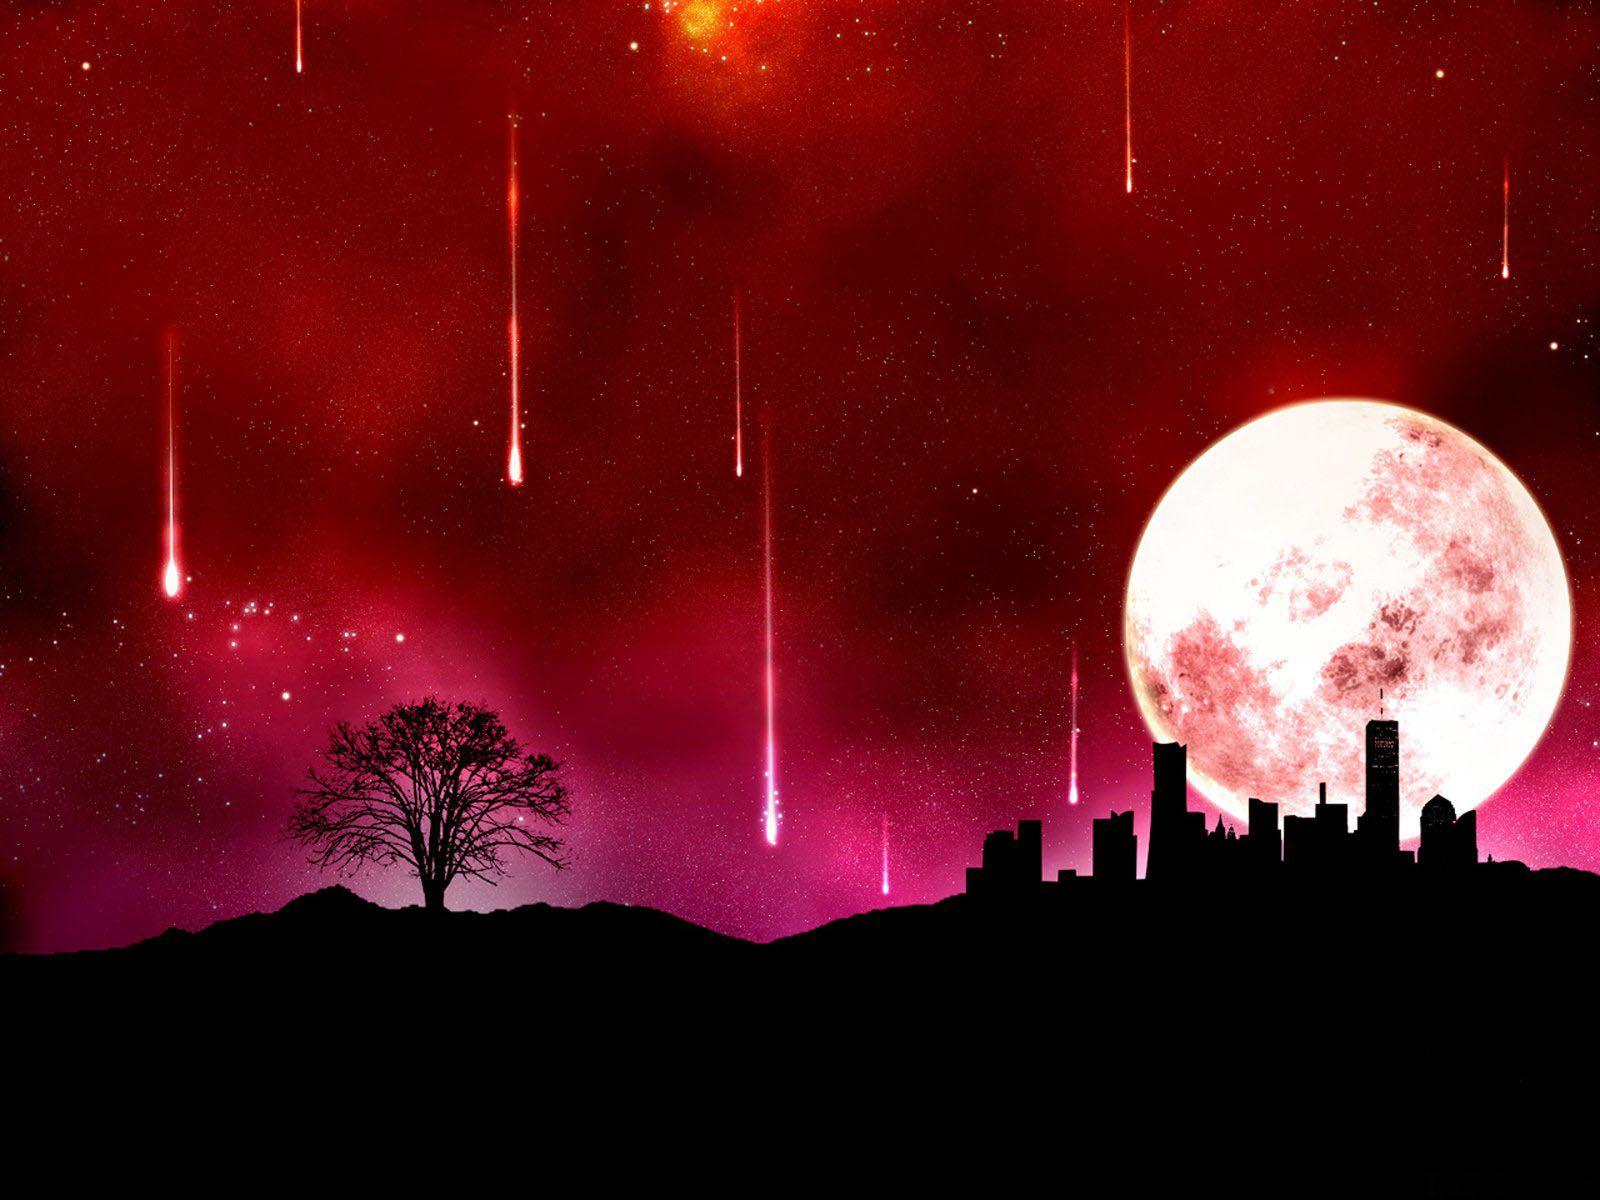 Blood Moon Abstract Wallpaper. Awesome Moon Wallpaper, Pretty Moon Wallpaper and Moon Wallpaper